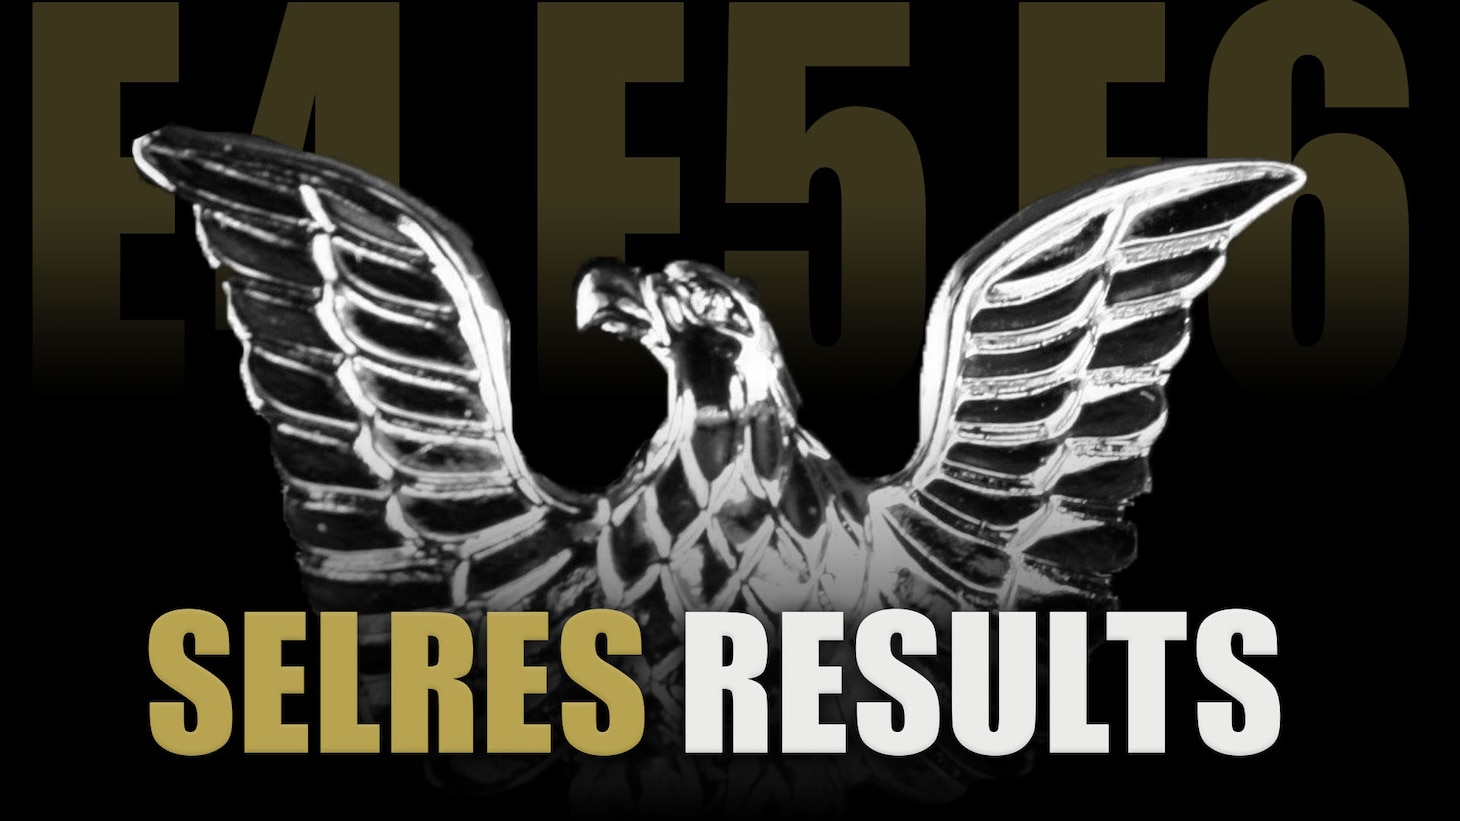 E4E6 SELRES Results Announced > U.S. Navy All Hands > Stories